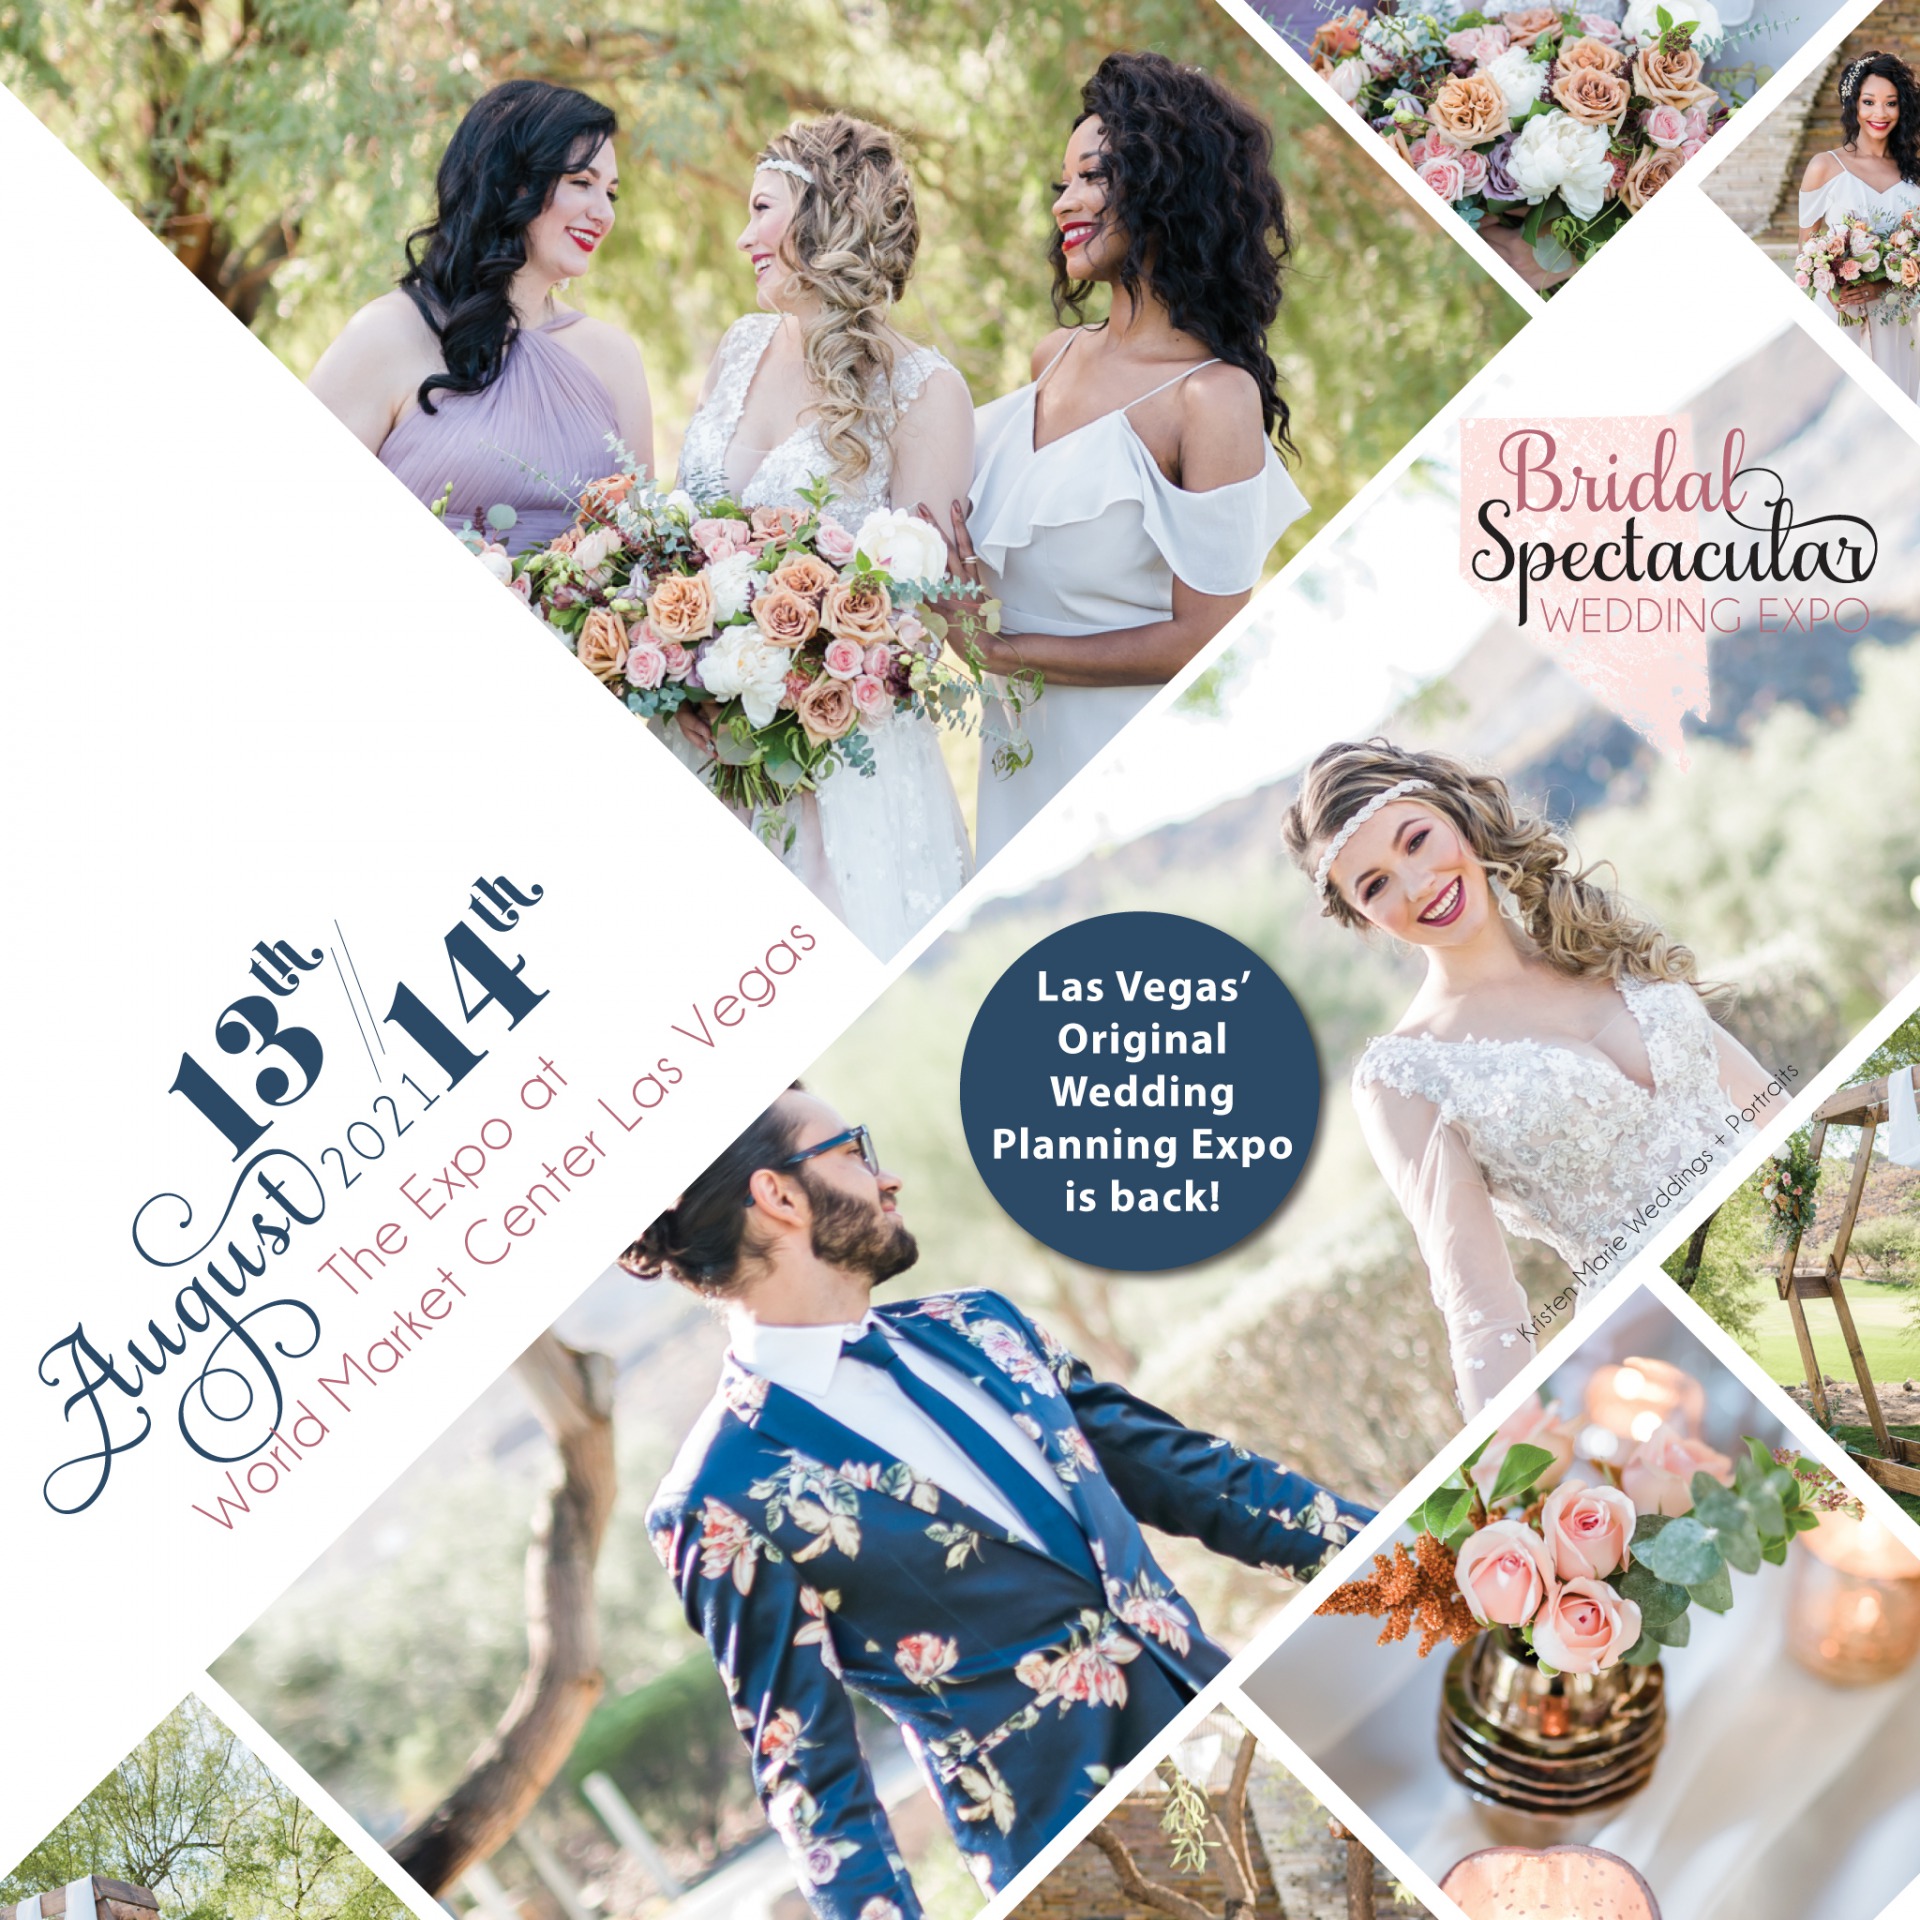 Bridal Spectacular Wedding Expo Press Release August 2021